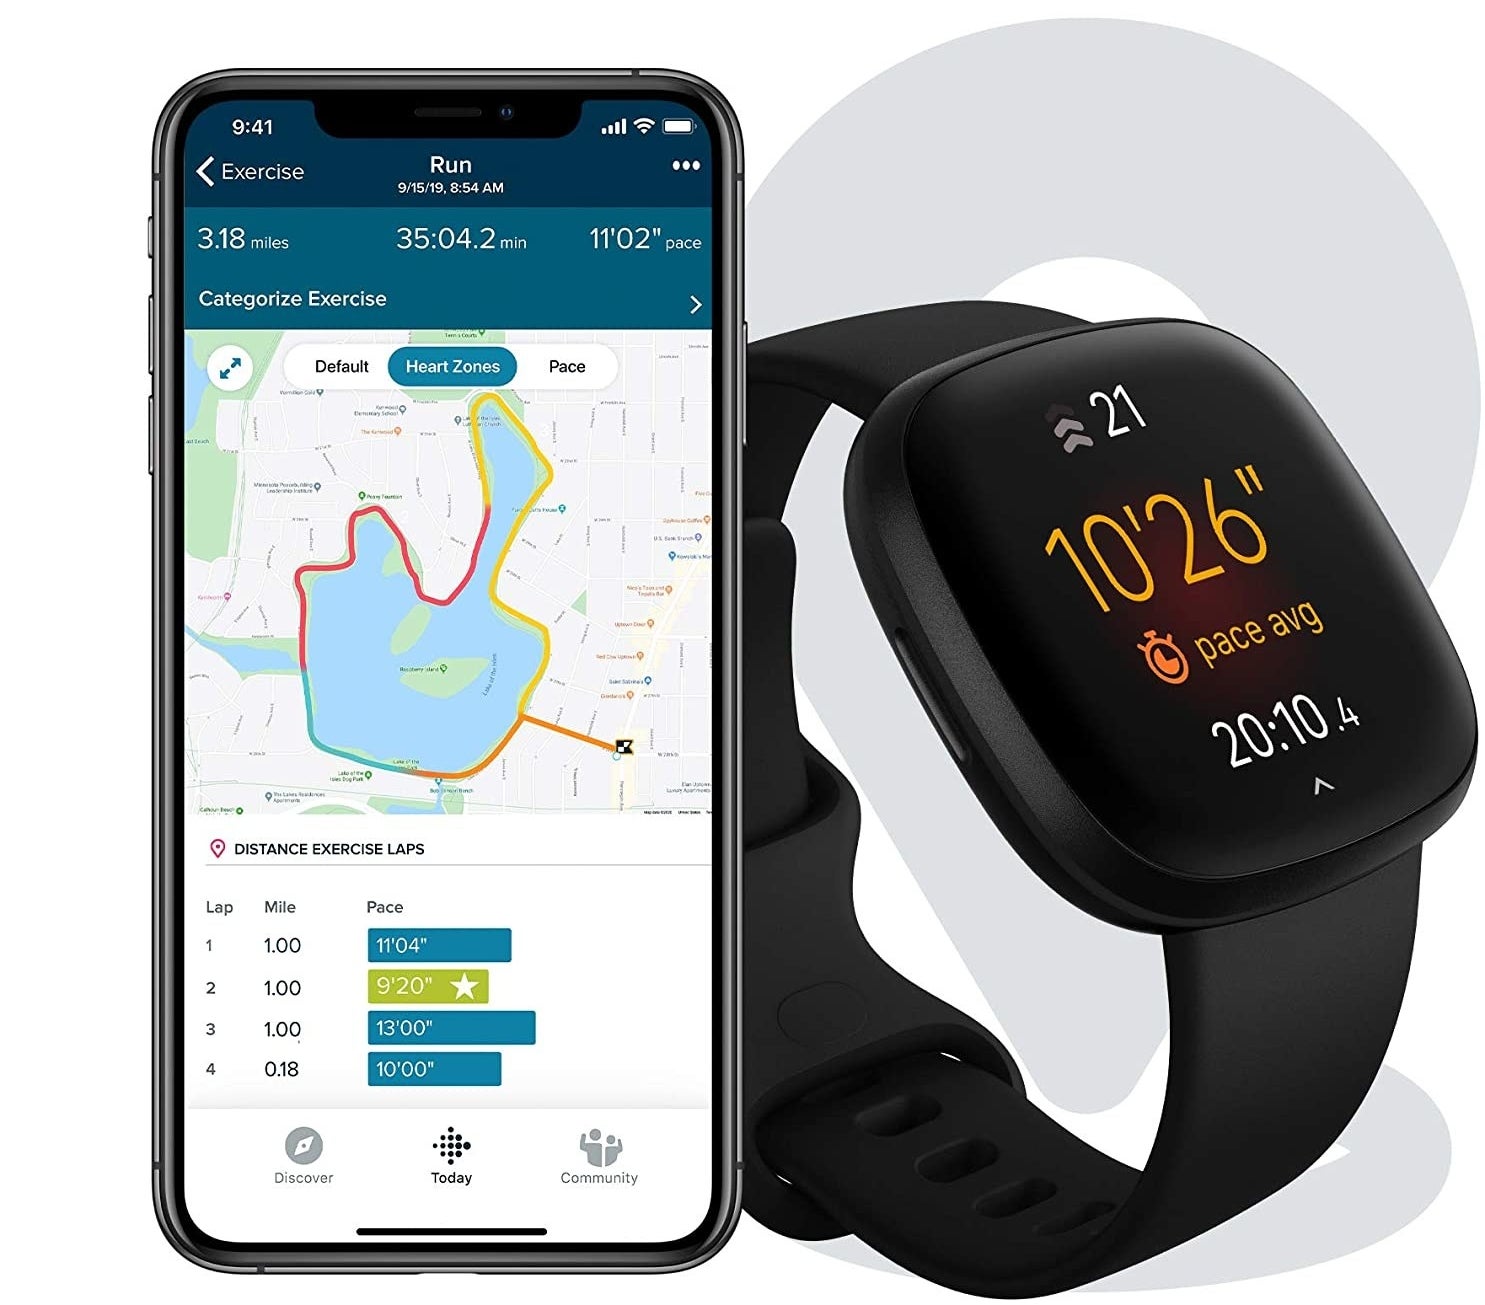 The versa 3 tracker with GPS